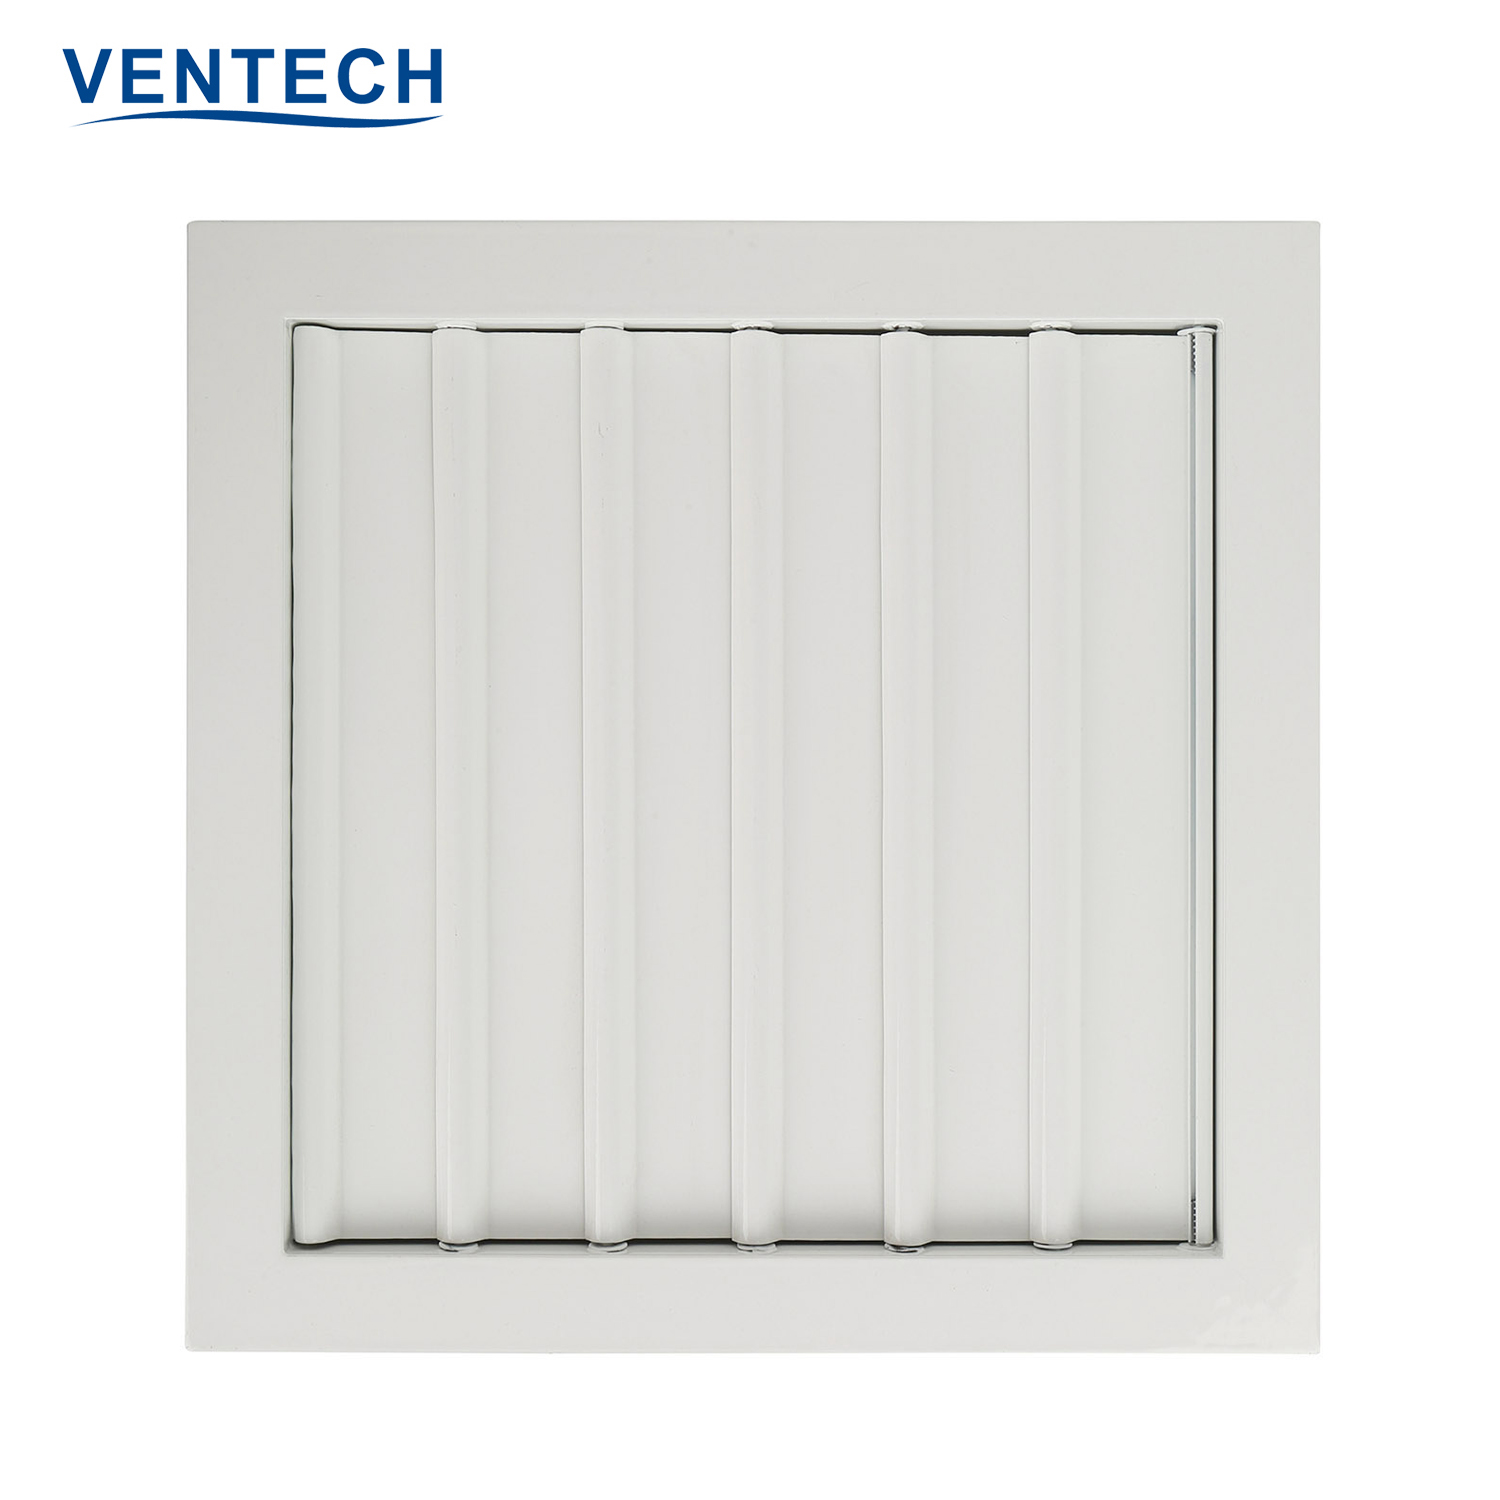 Ventech quality outdoor air louver company for air conditioning-2